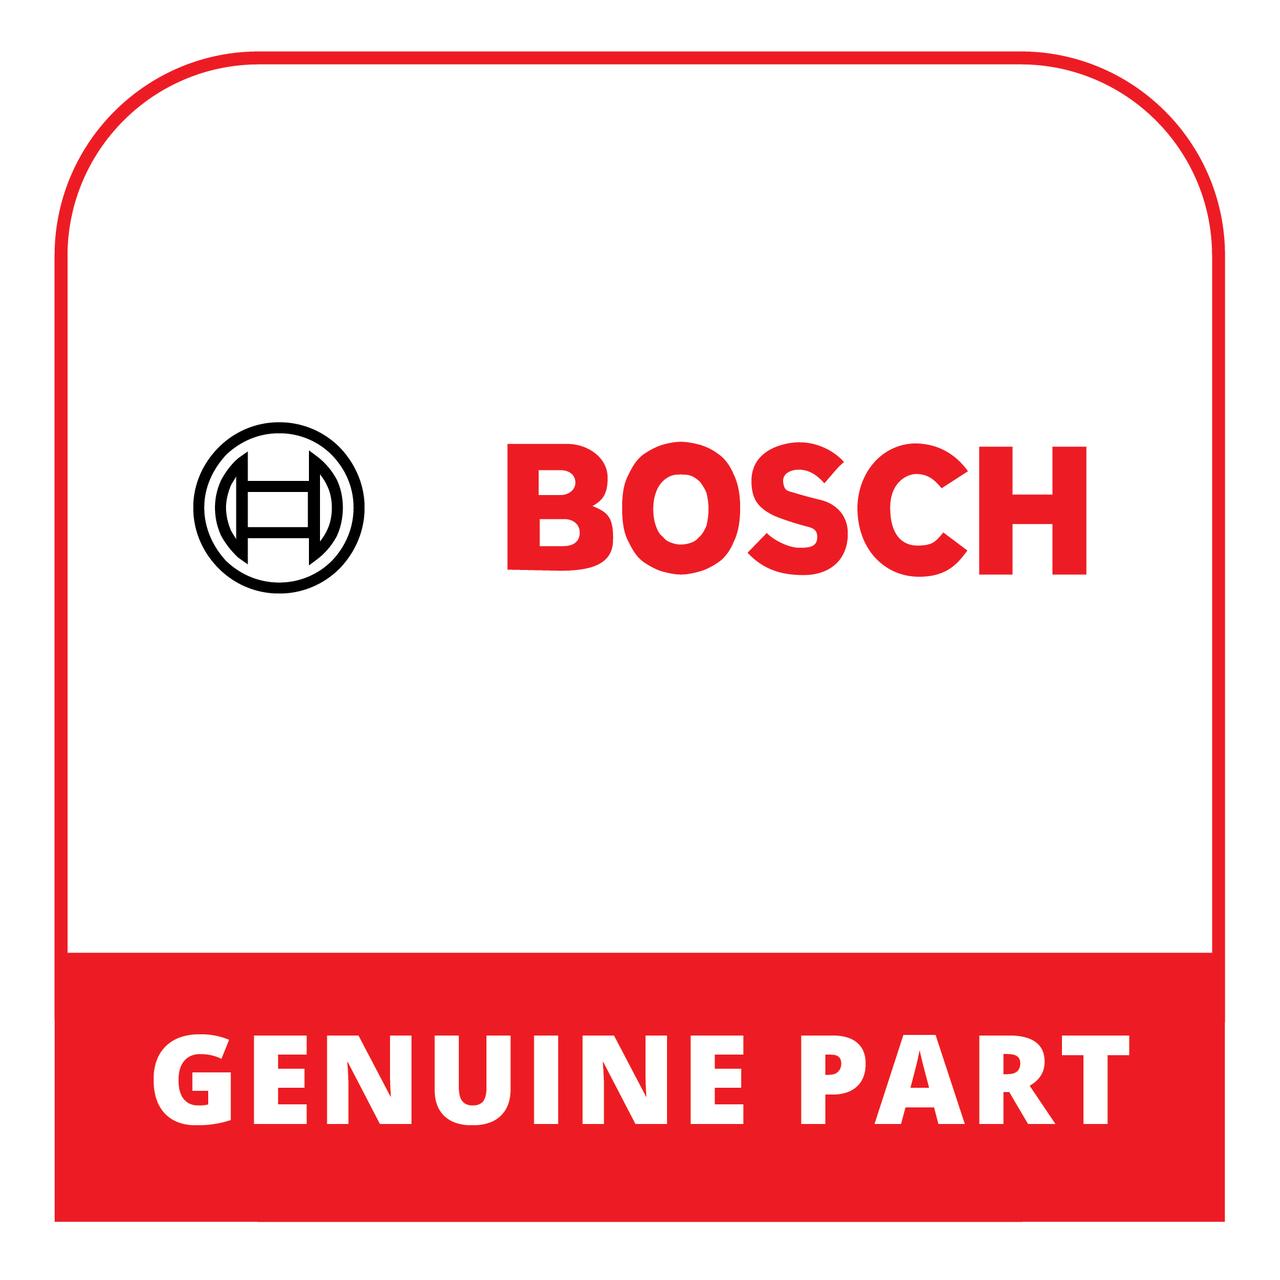 Bosch (Thermador) 10010763 - Taper - Genuine Bosch (Thermador) Part